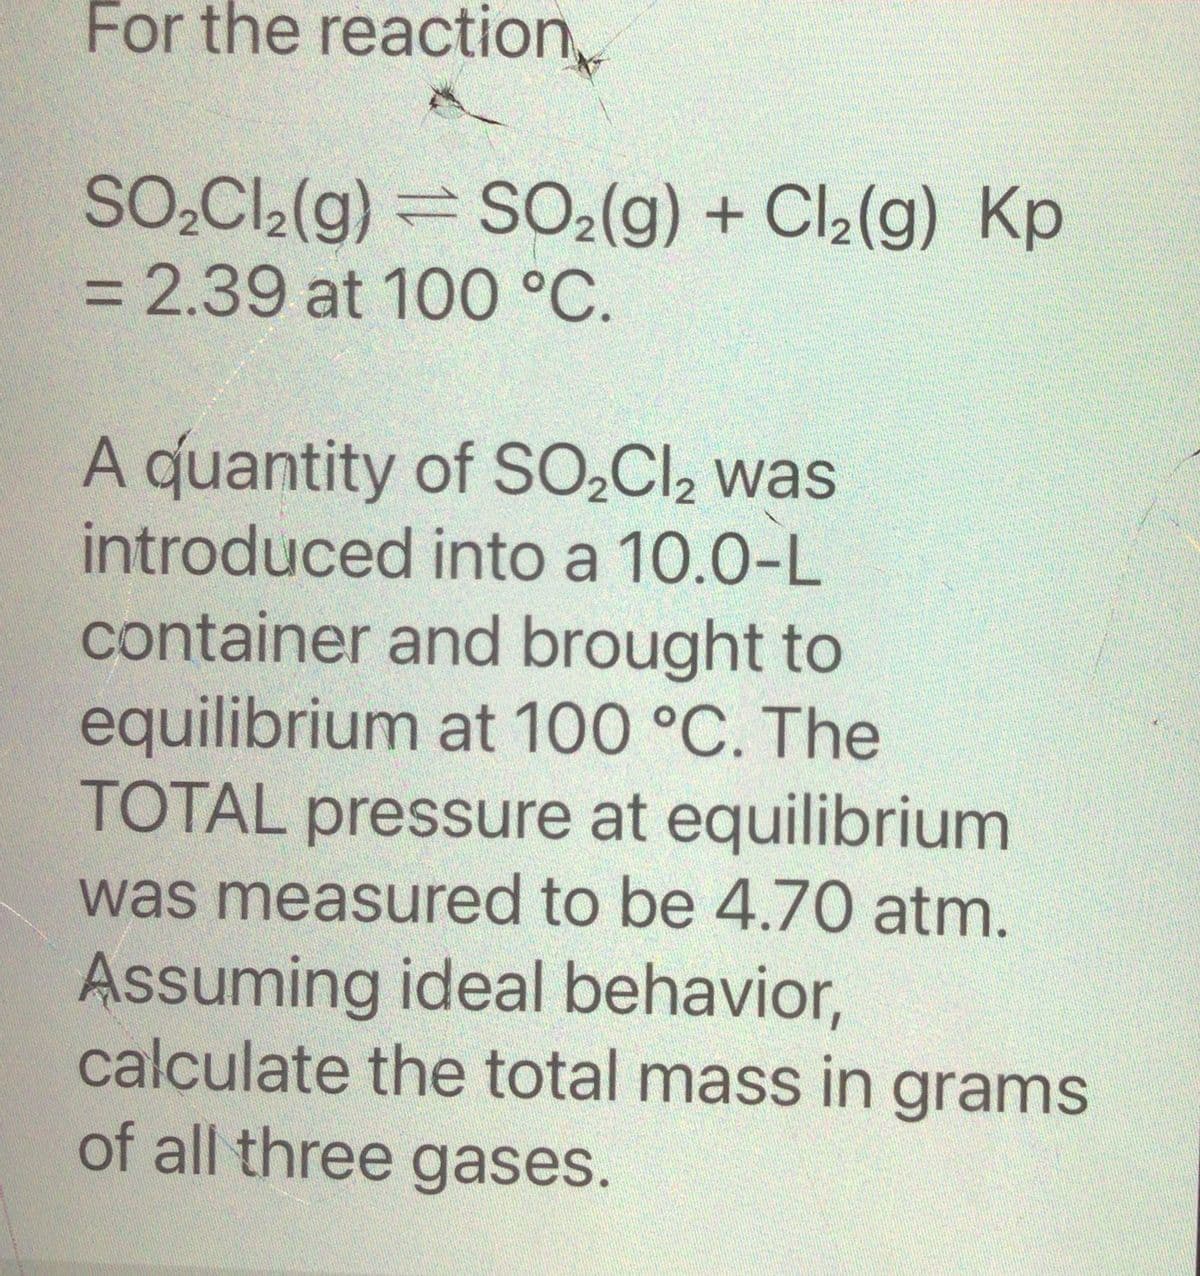 For the reaction
SO₂Cl₂(g) = SO₂(g) + Cl₂(g) Kp
= 2.39 at 100 °C.
A quantity of SO₂Cl₂ was
introduced into a 10.0-L
container and brought to
equilibrium at 100 °C. The
TOTAL pressure at equilibrium
was measured to be 4.70 atm.
Assuming ideal behavior,
calculate the total mass in grams
of all three gases.